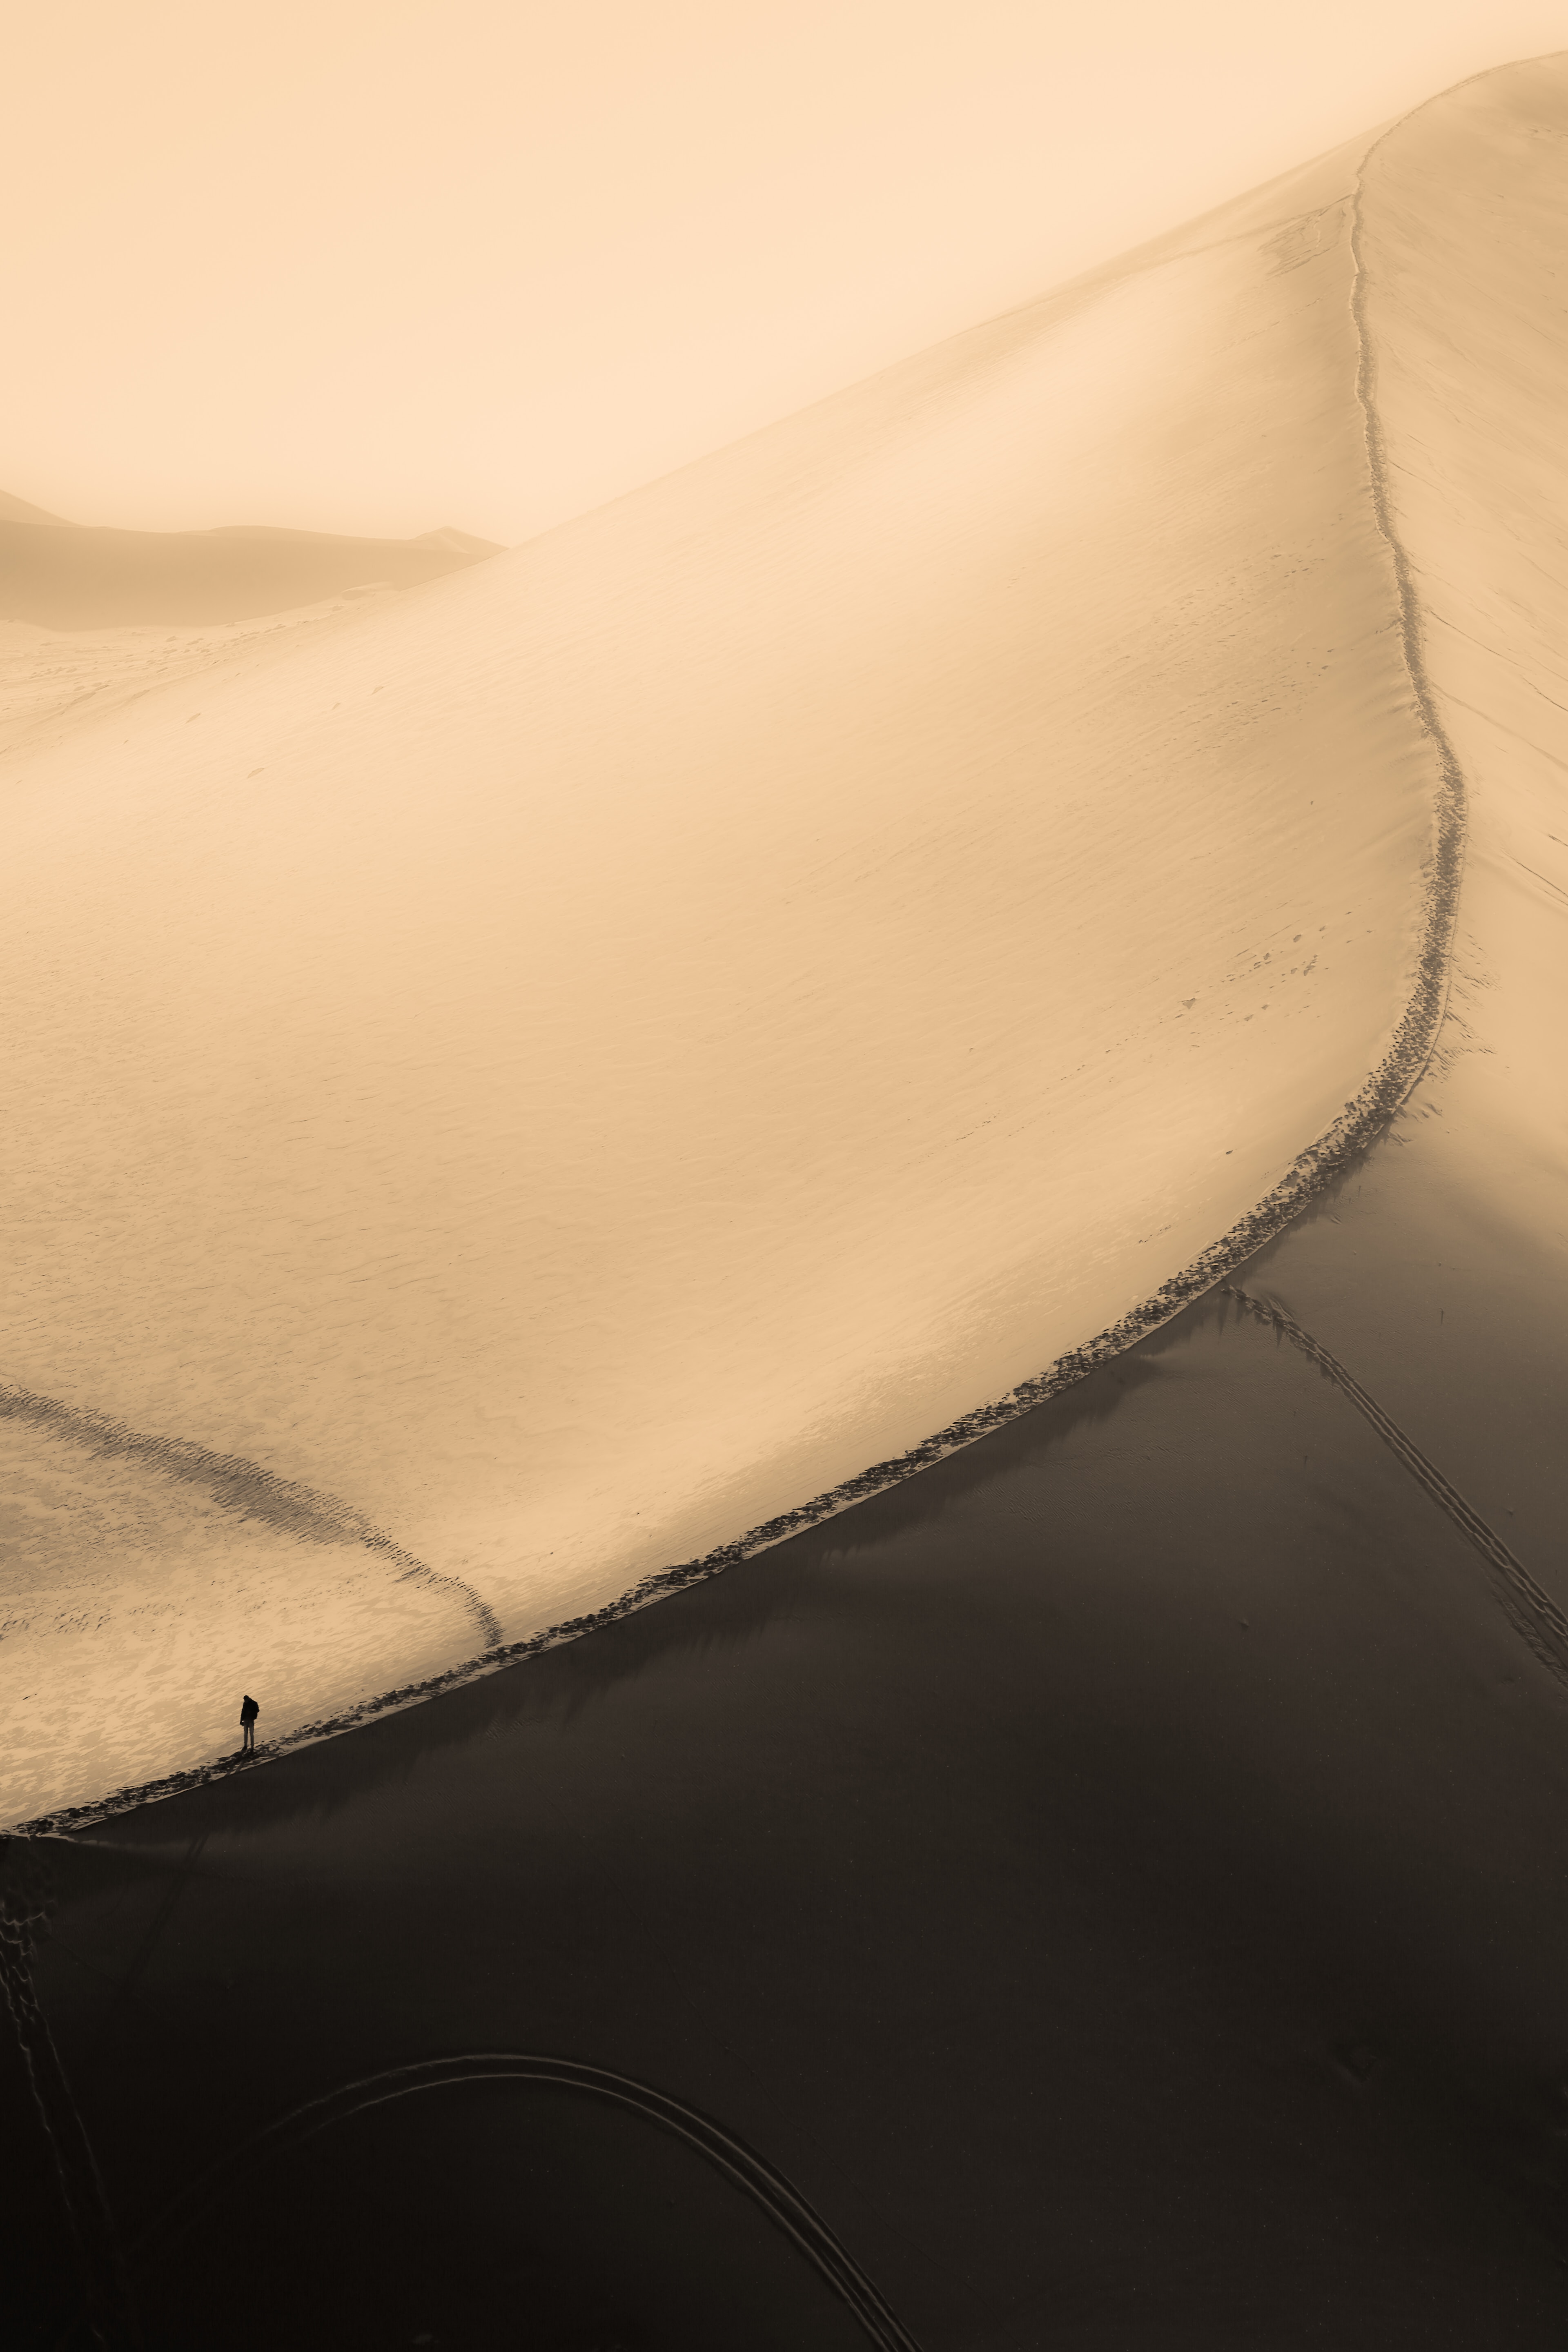 sand, desert, view from above, silhouette, miscellanea, miscellaneous, dunes, links